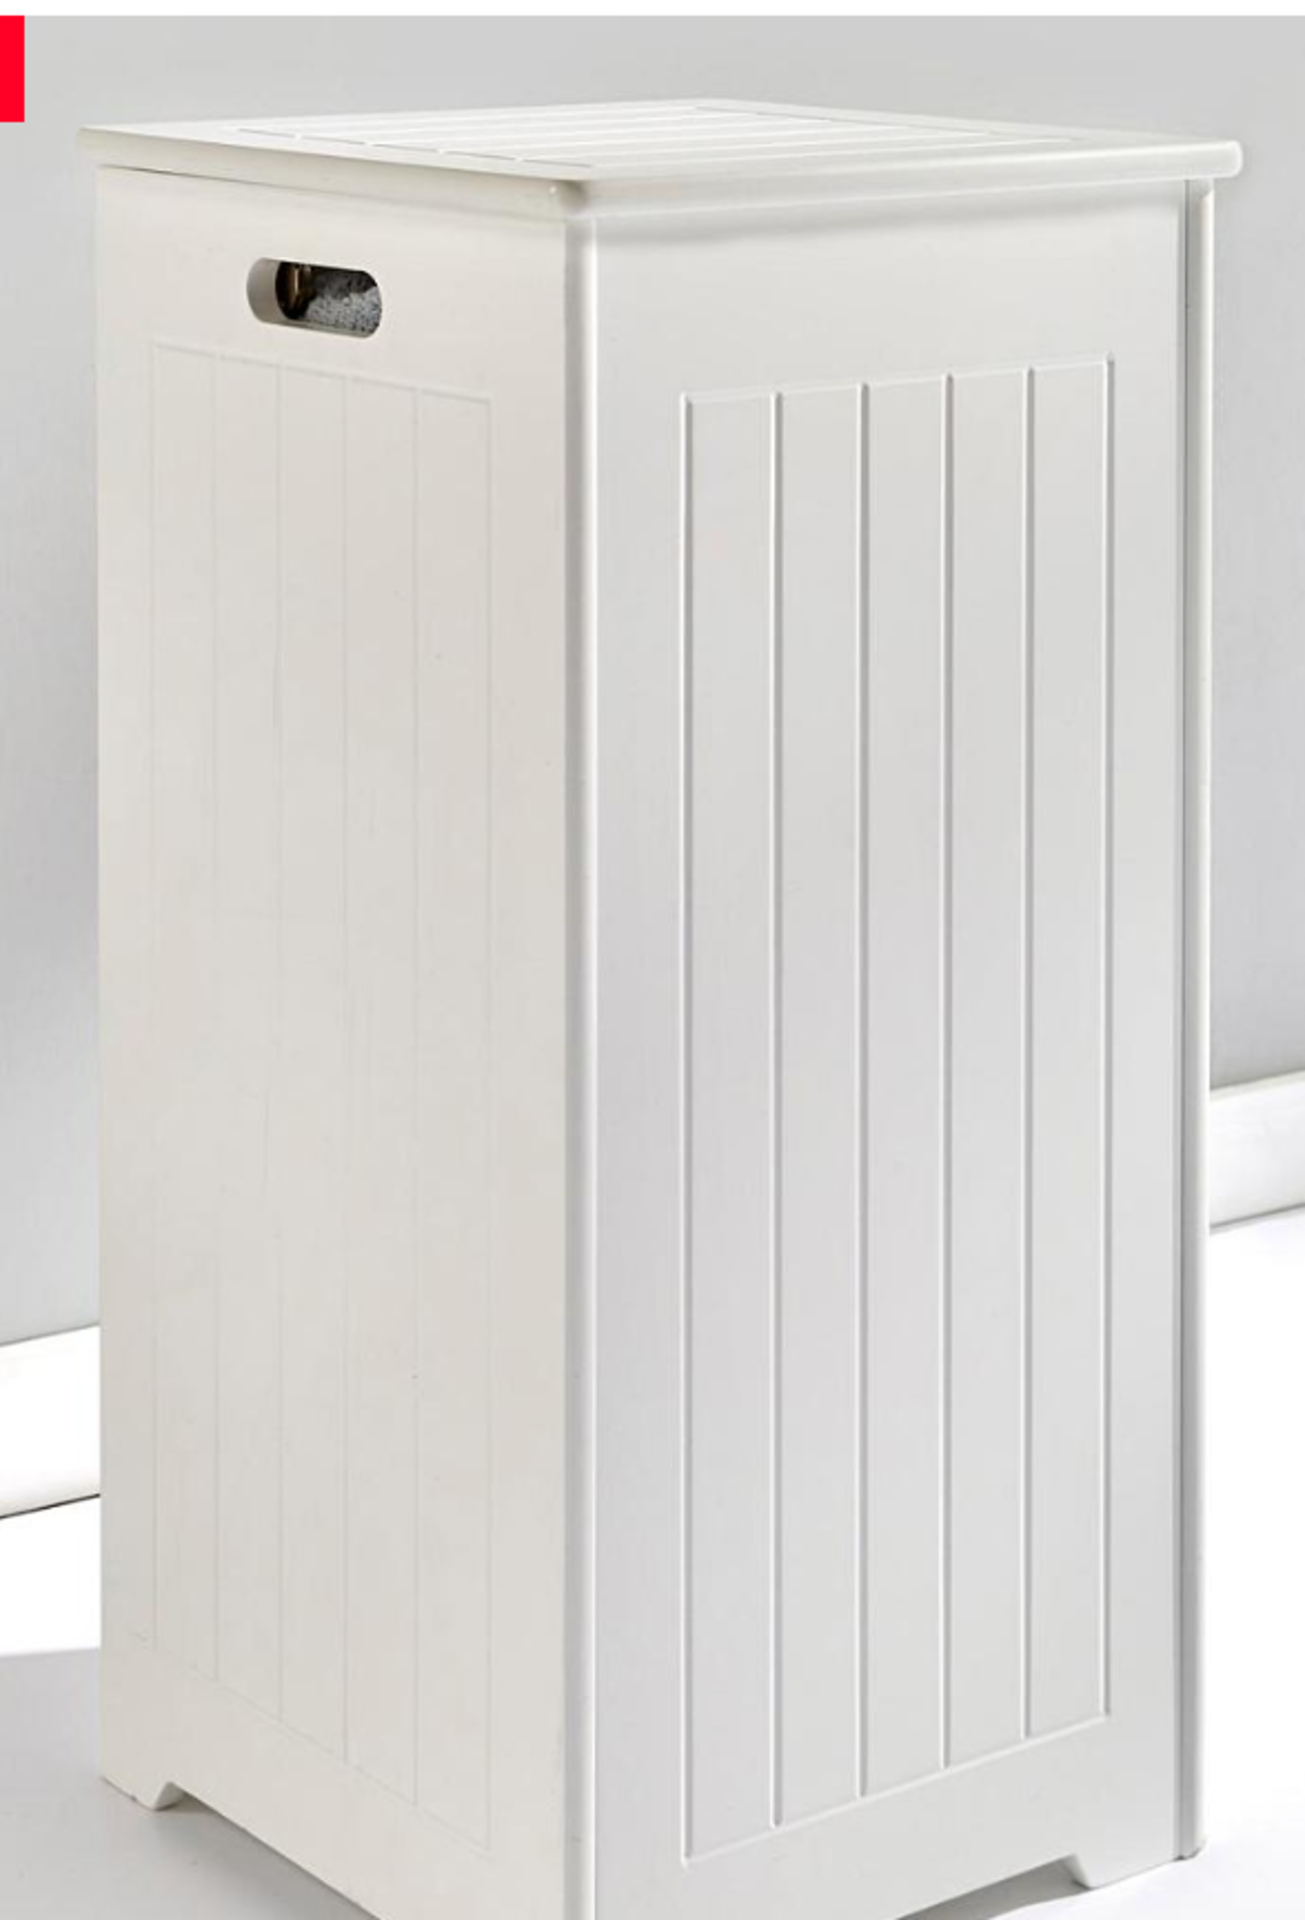 New England Slimline Laundry Hamper. - ER20. Clean, pretty and boasting a gorgeous country style,